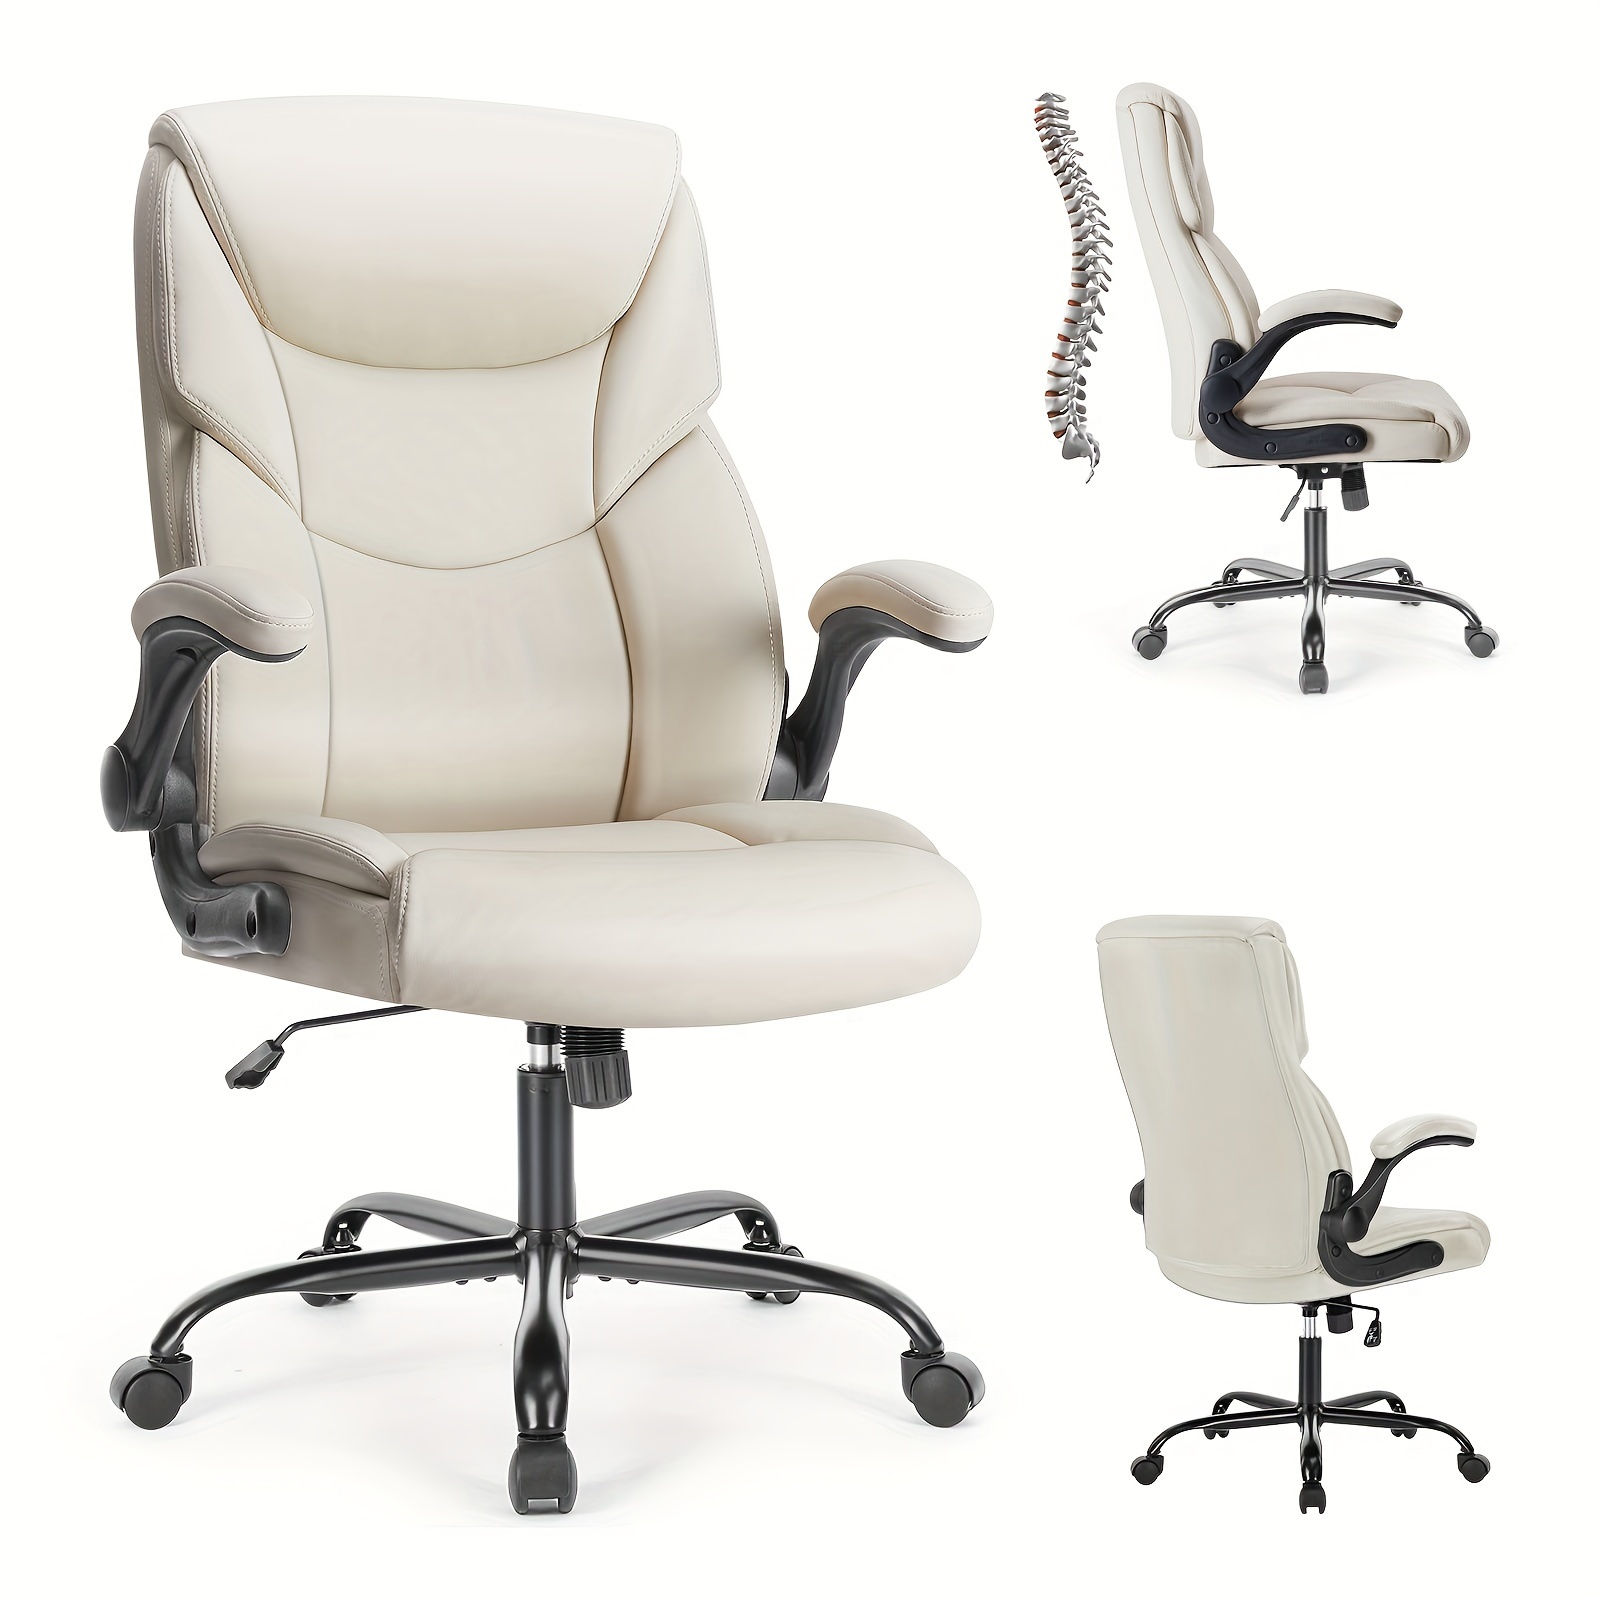 

Leather Office Chair, Boss Chair With Flipped Armrests, High Back Ergonomic Administrative Desk And Chair